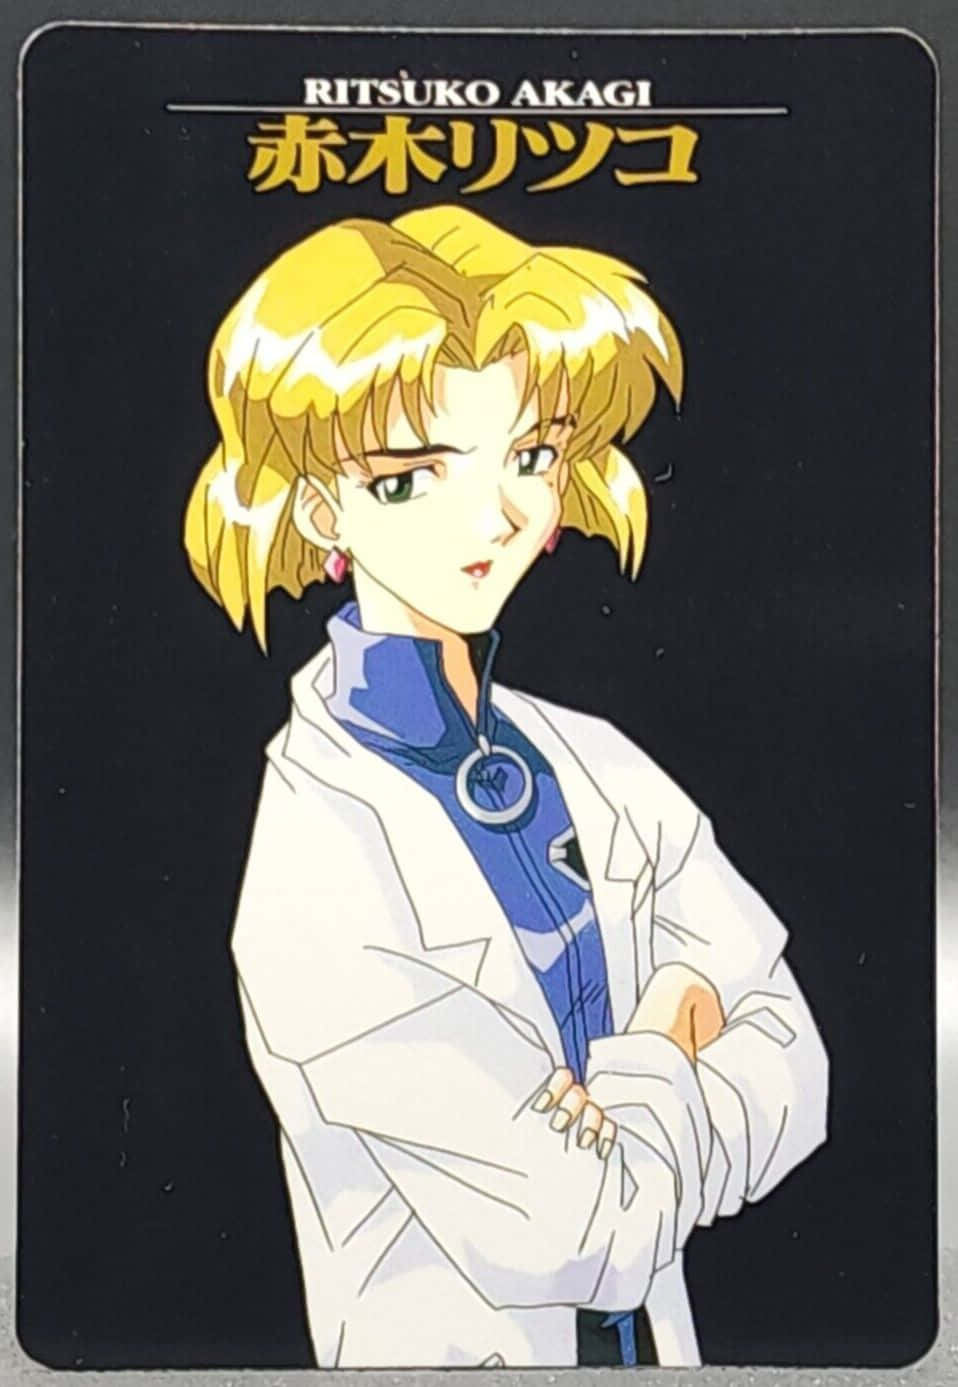 Ritsuko Akagi, the intelligent and skilled scientist from the Evangelion series Wallpaper